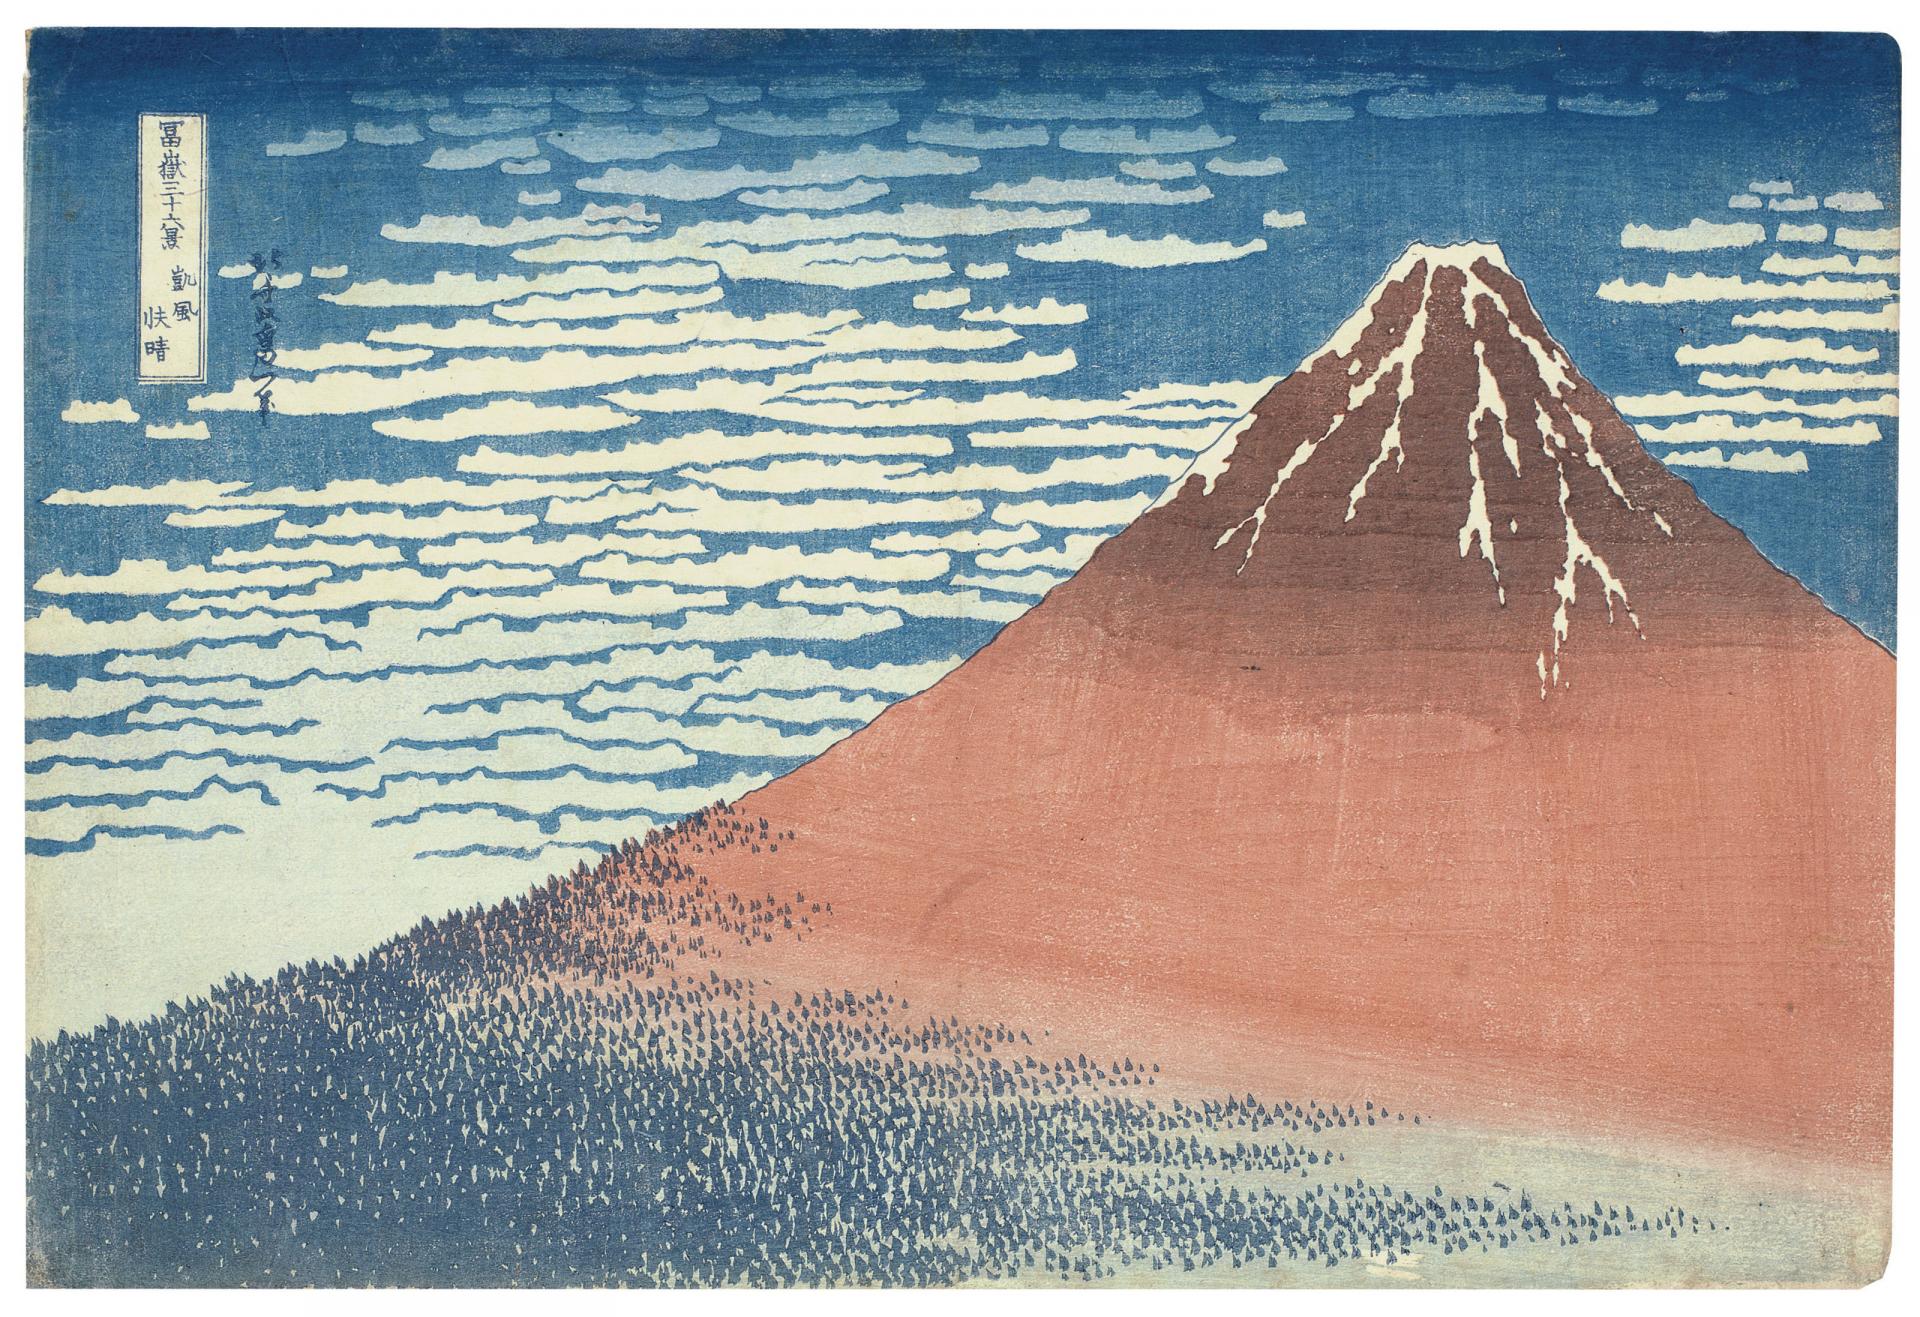 The Most Iconic Japanese Ukiyo-e Artist Whose Name You May Not Know